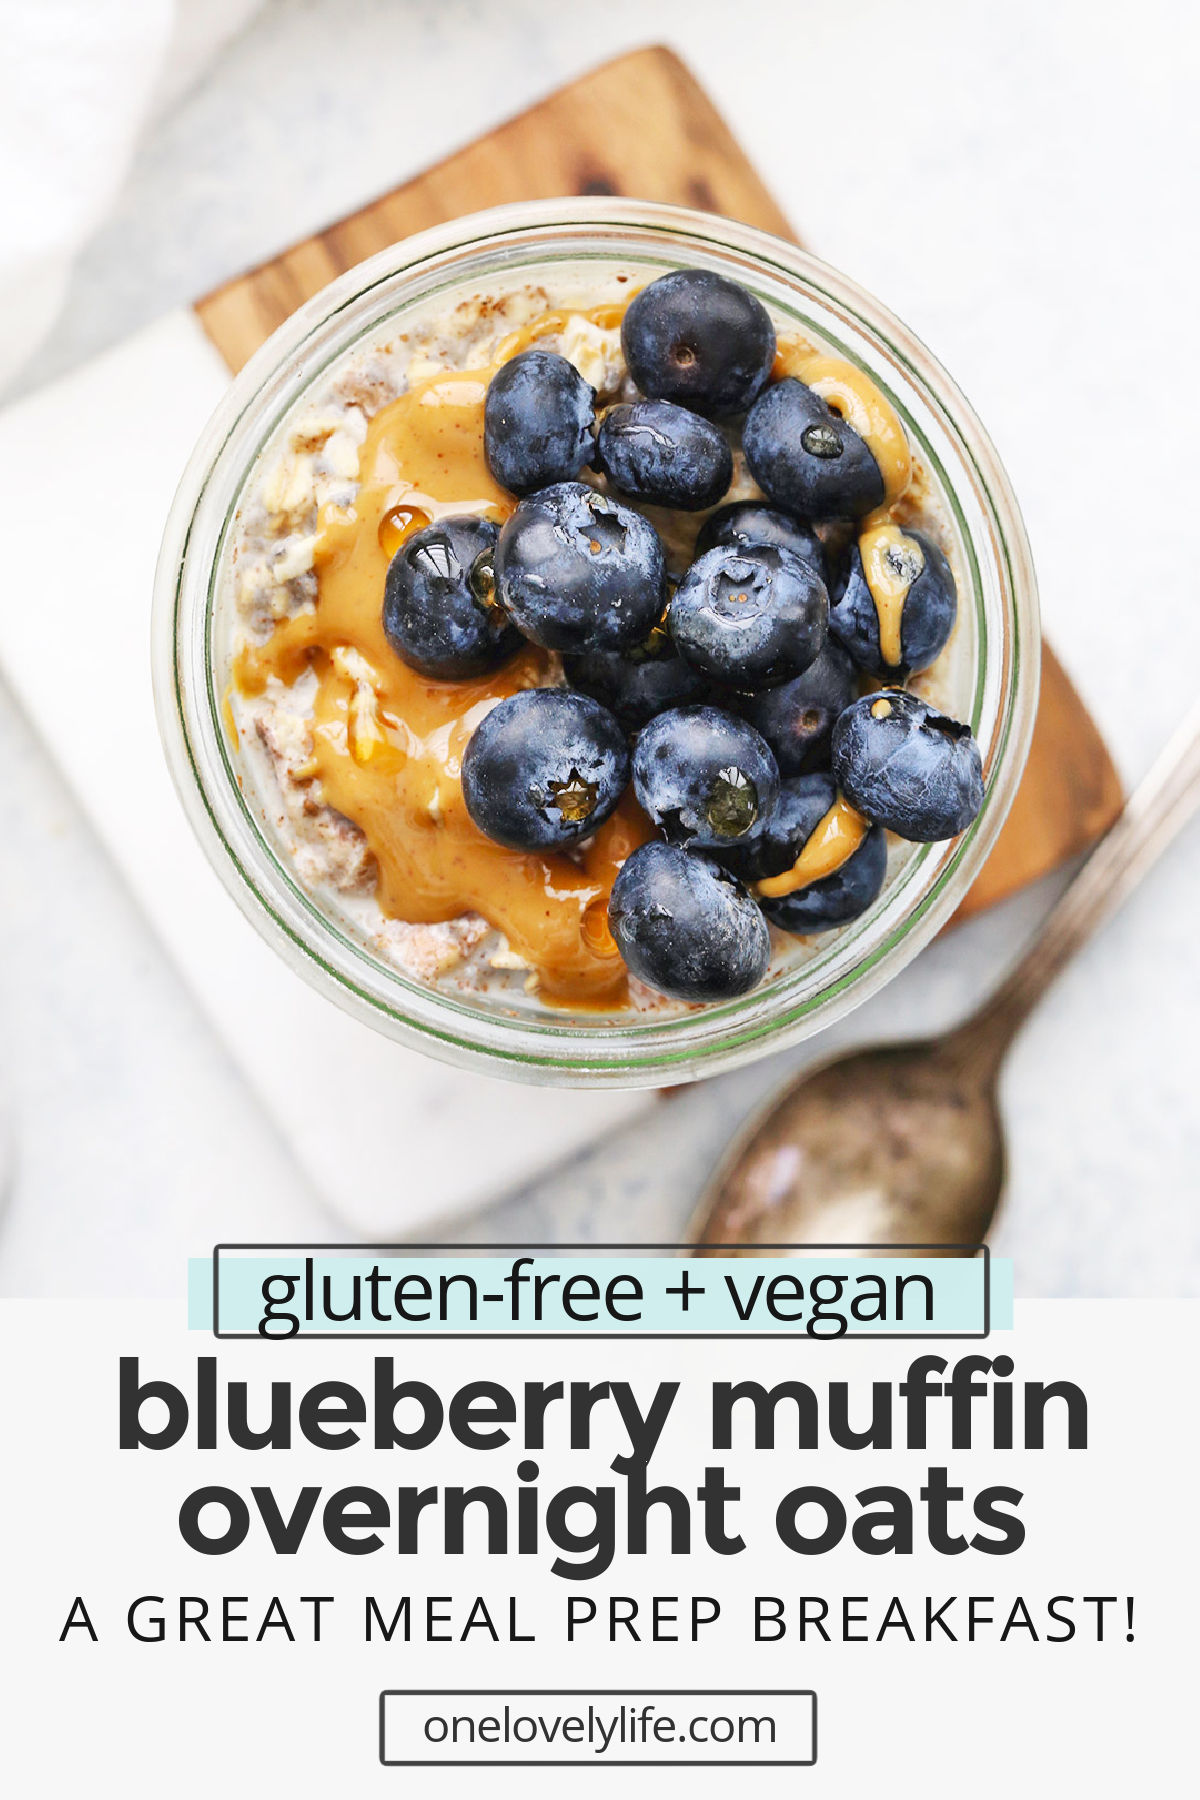 Blueberry Muffin Overnight Oats - Creamy, delicious overnight oats with a blueberry muffin twist!  You'll love this yummy meal prep breakfast! (Gluten-free, vegan) // Meal Prep Breakfast // Blueberry Overnight Oats // Healthy Breakfast #glutenfree #overnightoats #oatmeal #vegan #healthybreakfast